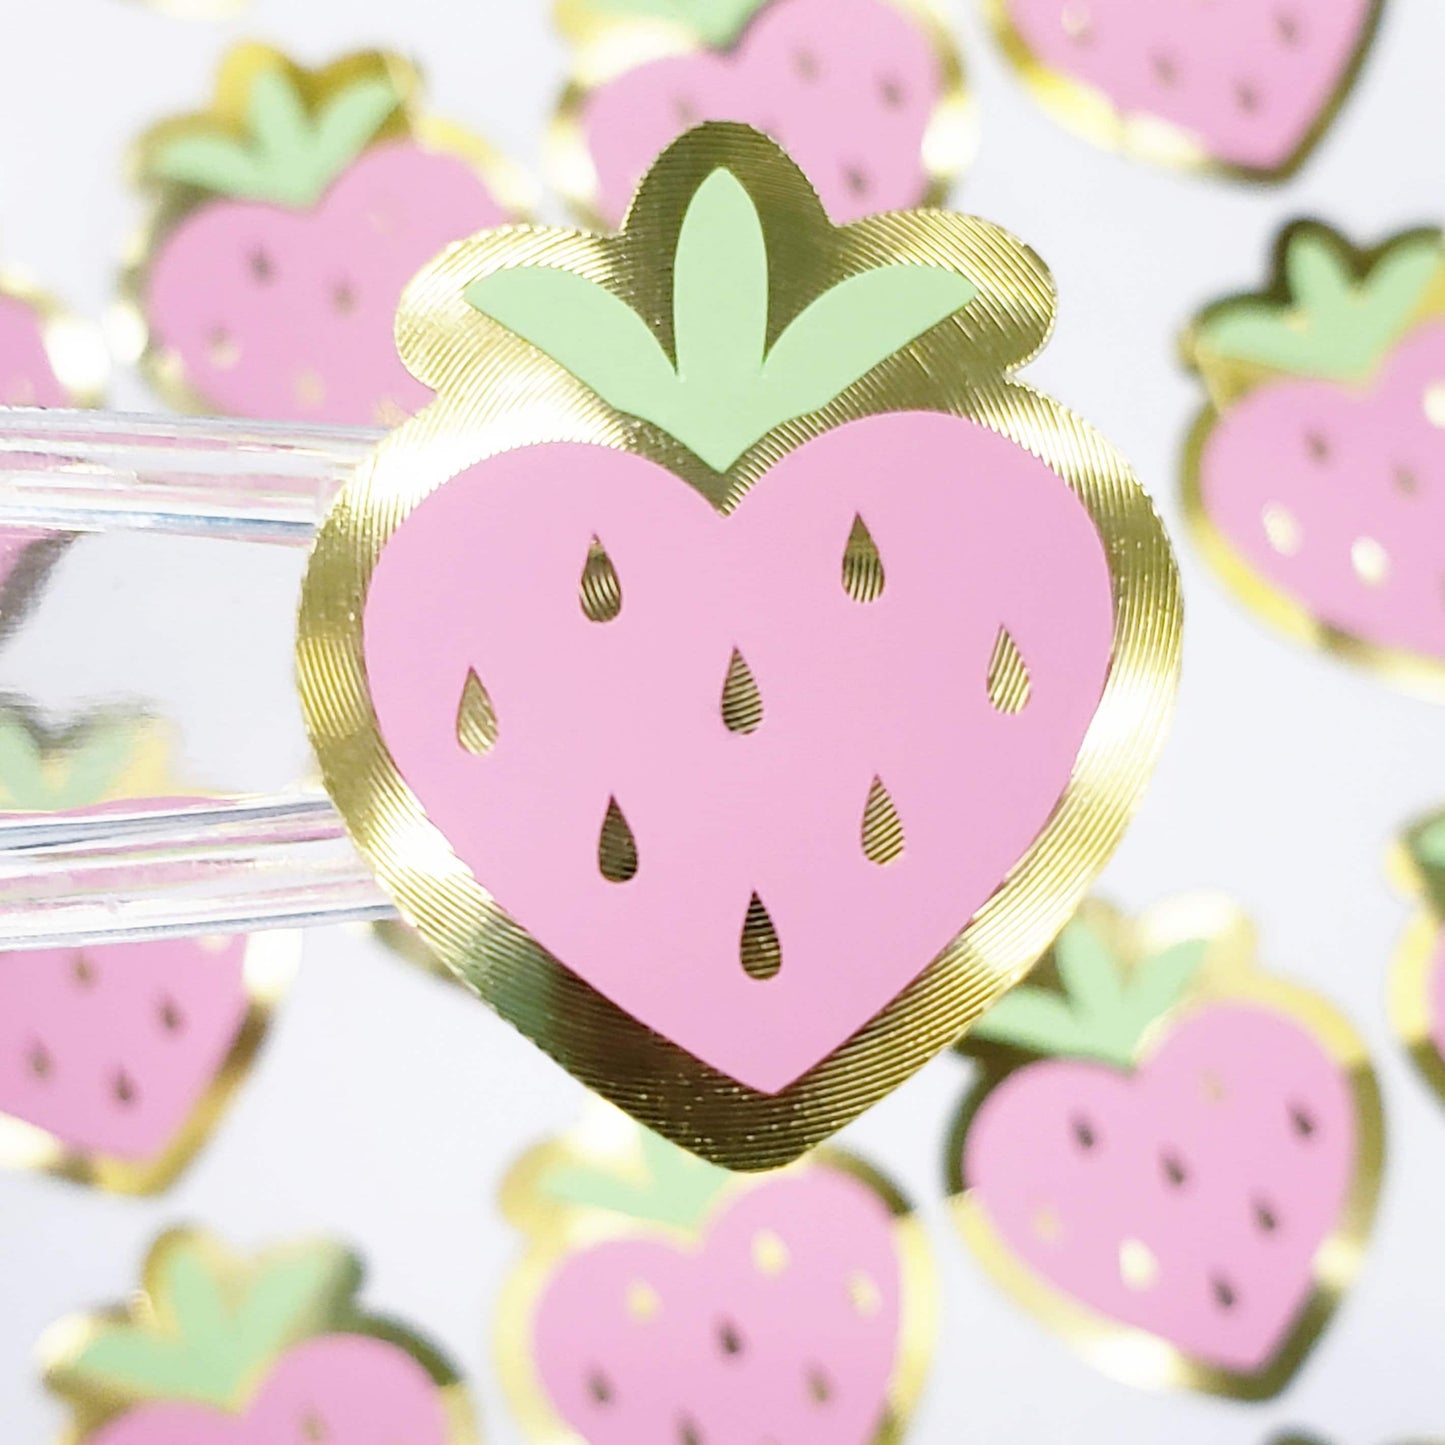 Light Pink Strawberry Heart Stickers, set of 30 cute fruit decals for Valentine's Day cards, envelope seals, sticker gift for teachers.